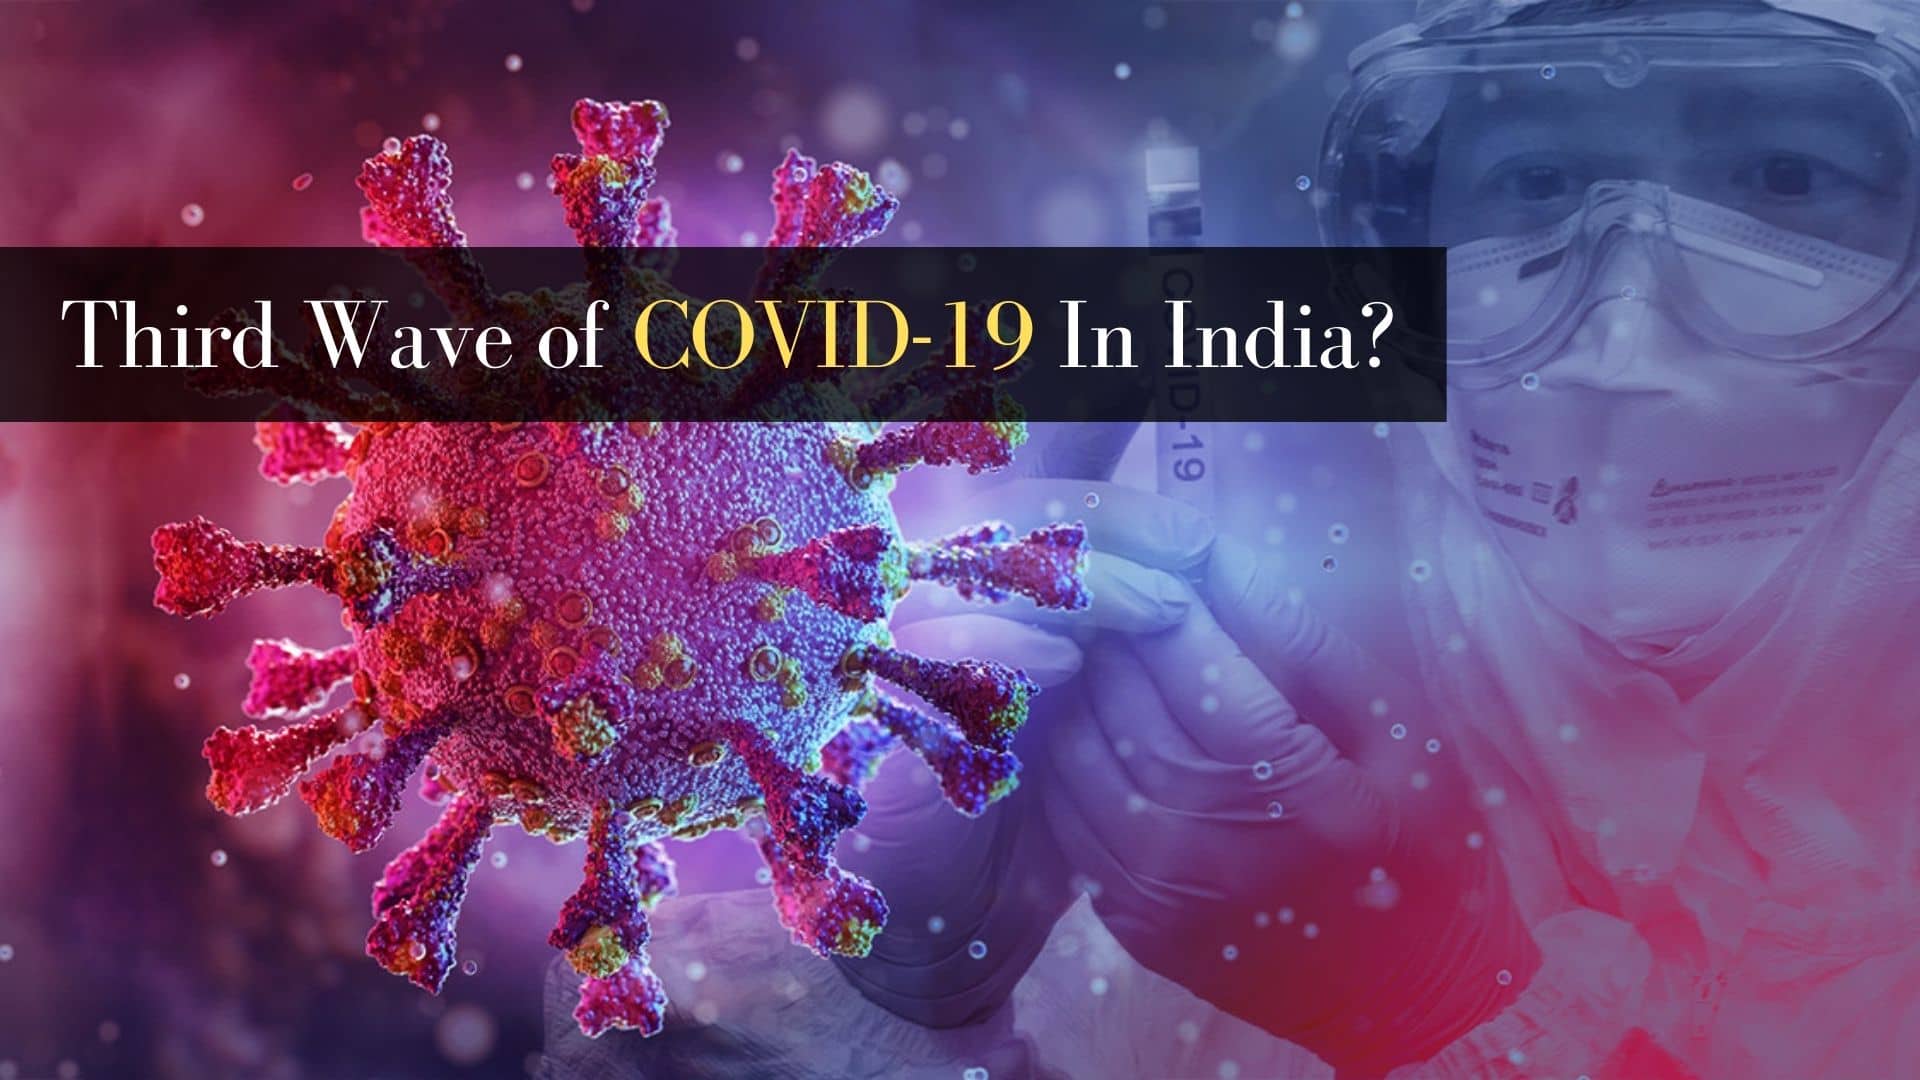 COVID-19 Live Updates: Third Wave In India Soon? Country Logs 12,428 New COVID Cases In 24 Hours